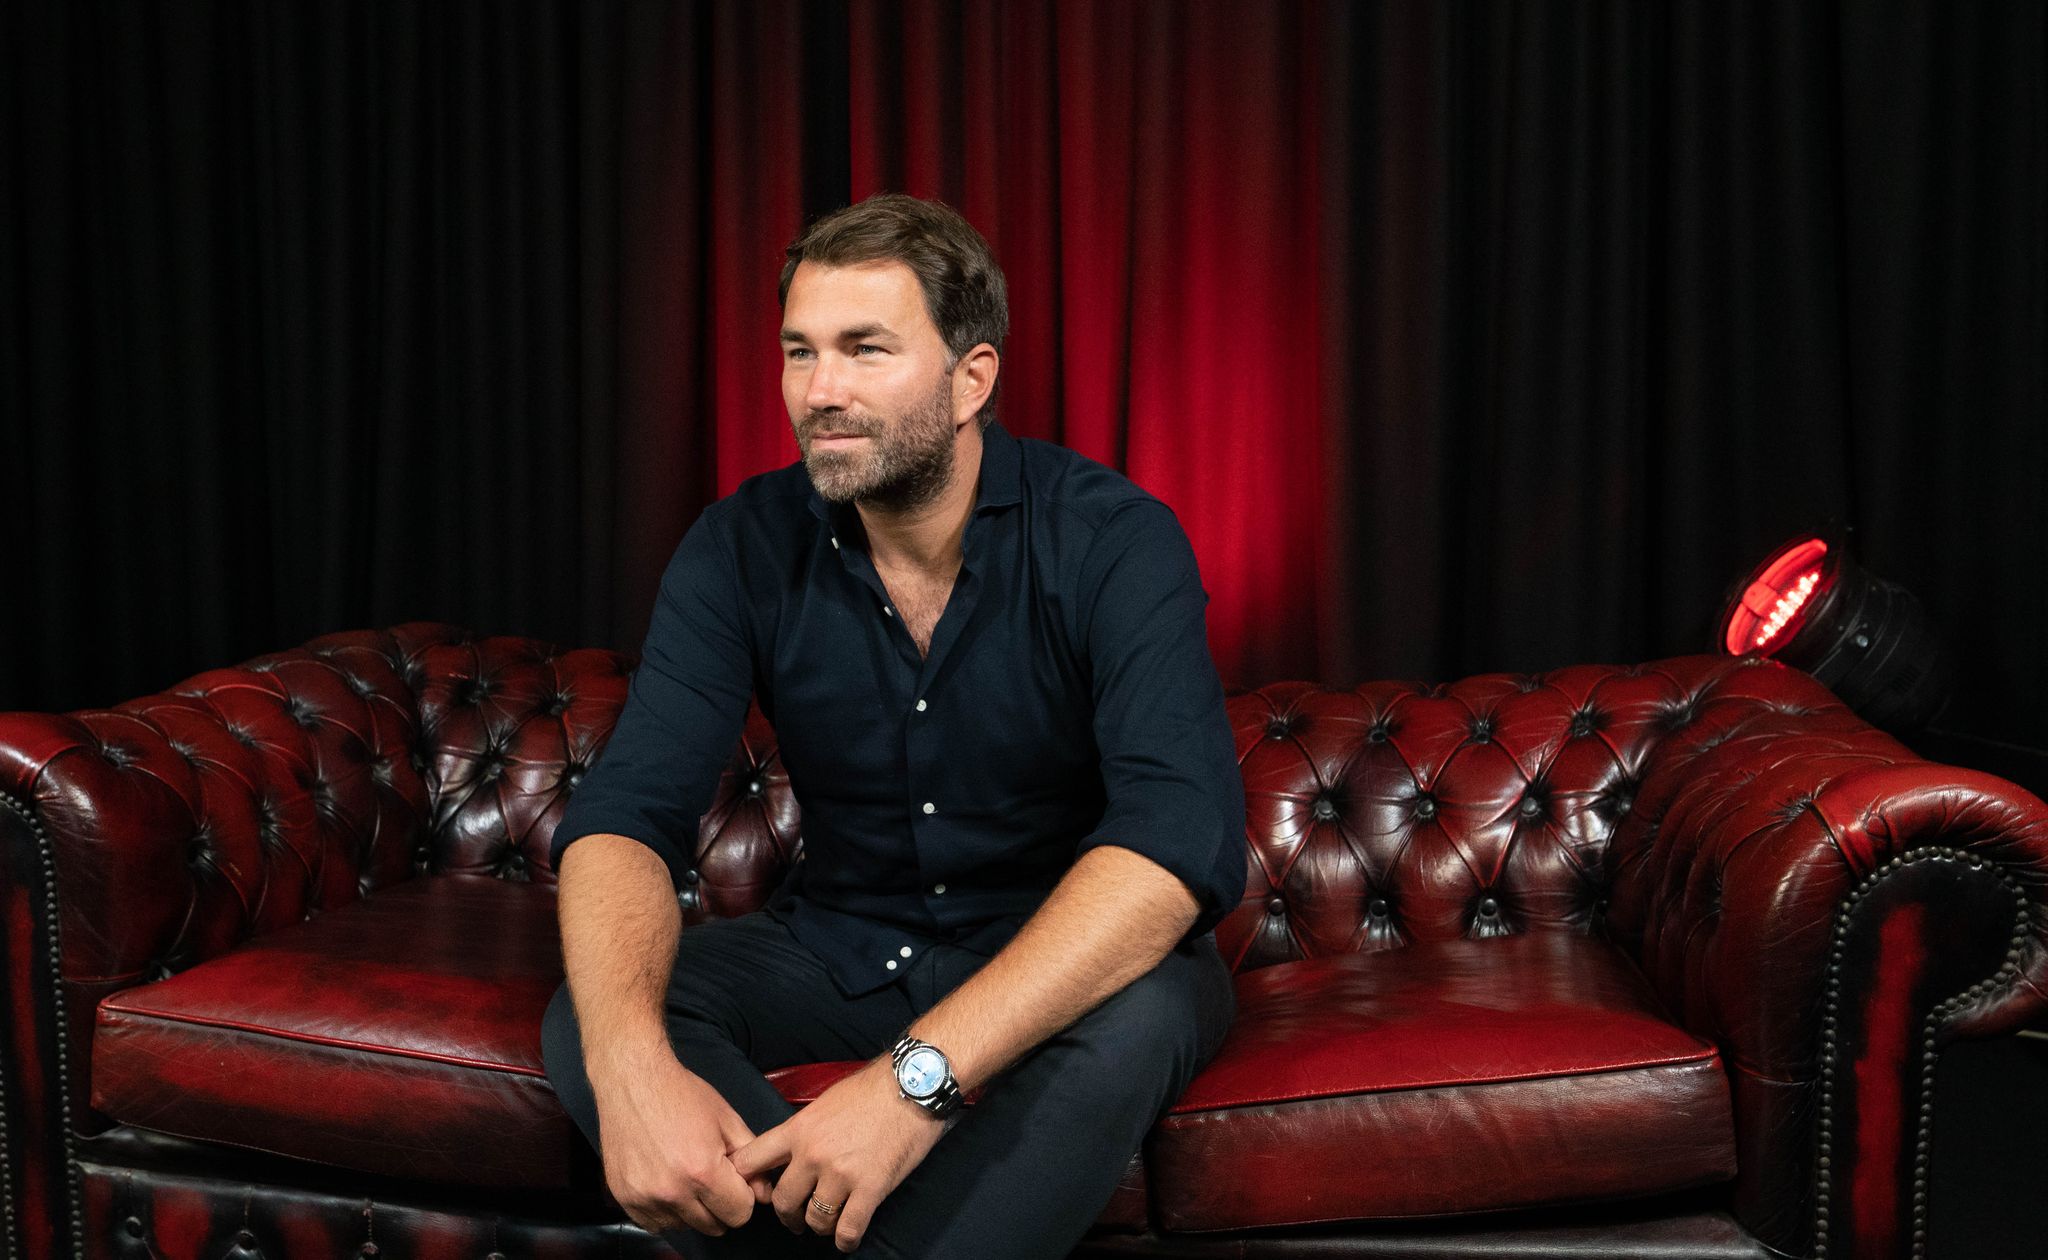 Eddie Hearn Takes On The Mob For The Launch Of Mafia: Definitive Edition